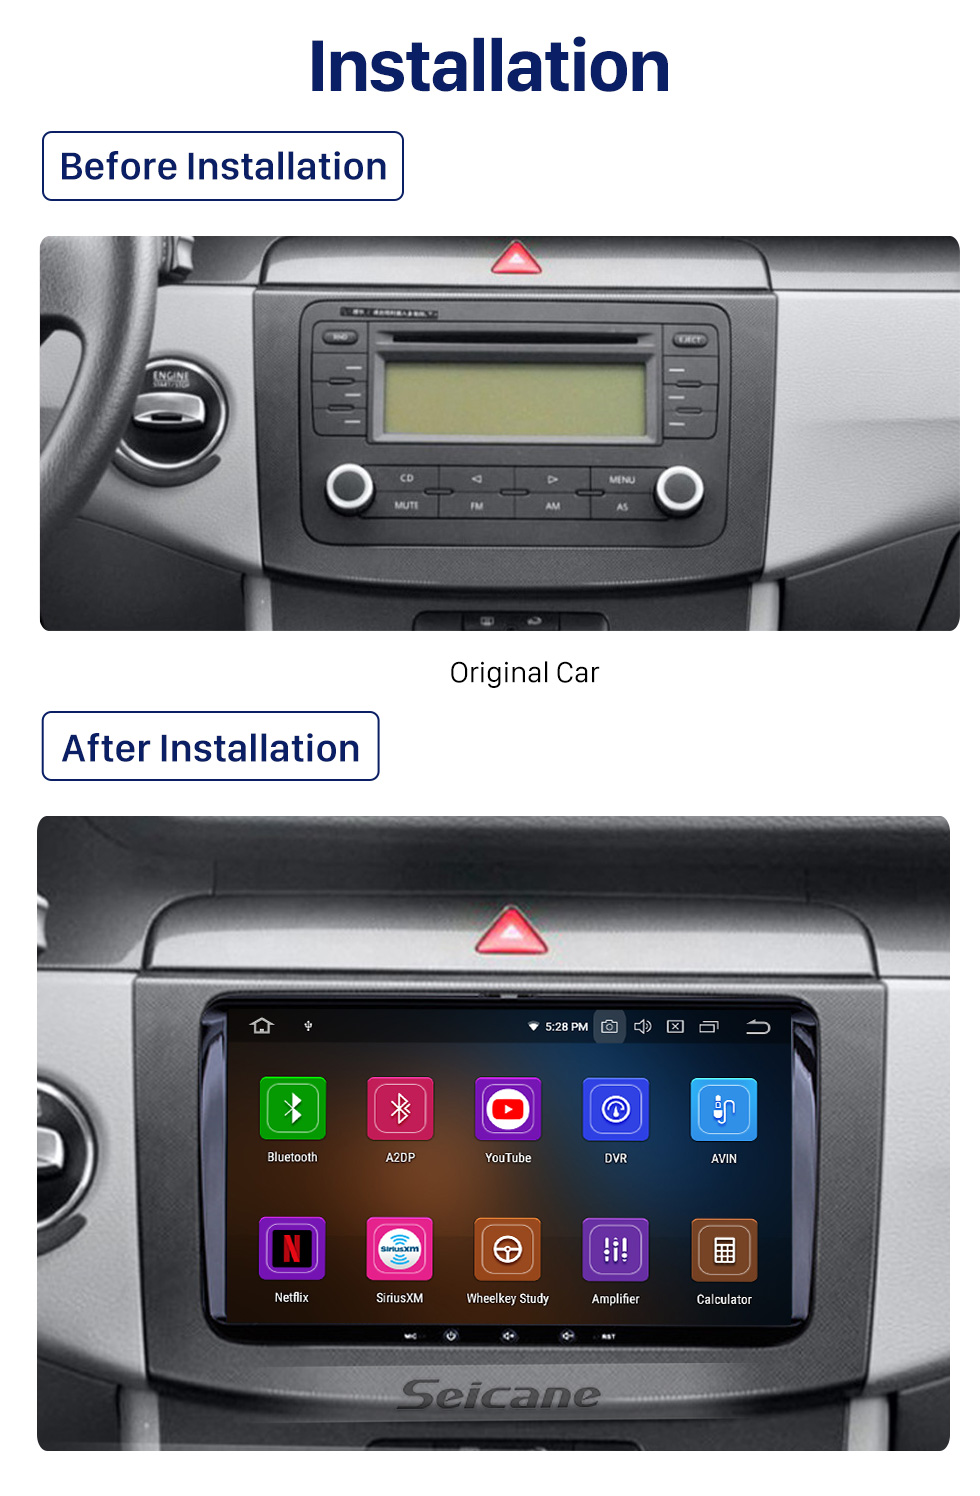 Seicane Aftermarket Android 10.0 GPS Navigation System for VW Volkswagen Universal SKODA Seat Support Radio Bluetooth 3G WiFi DVD Player Mirror Link OBD2 DVR Backup Camera Video